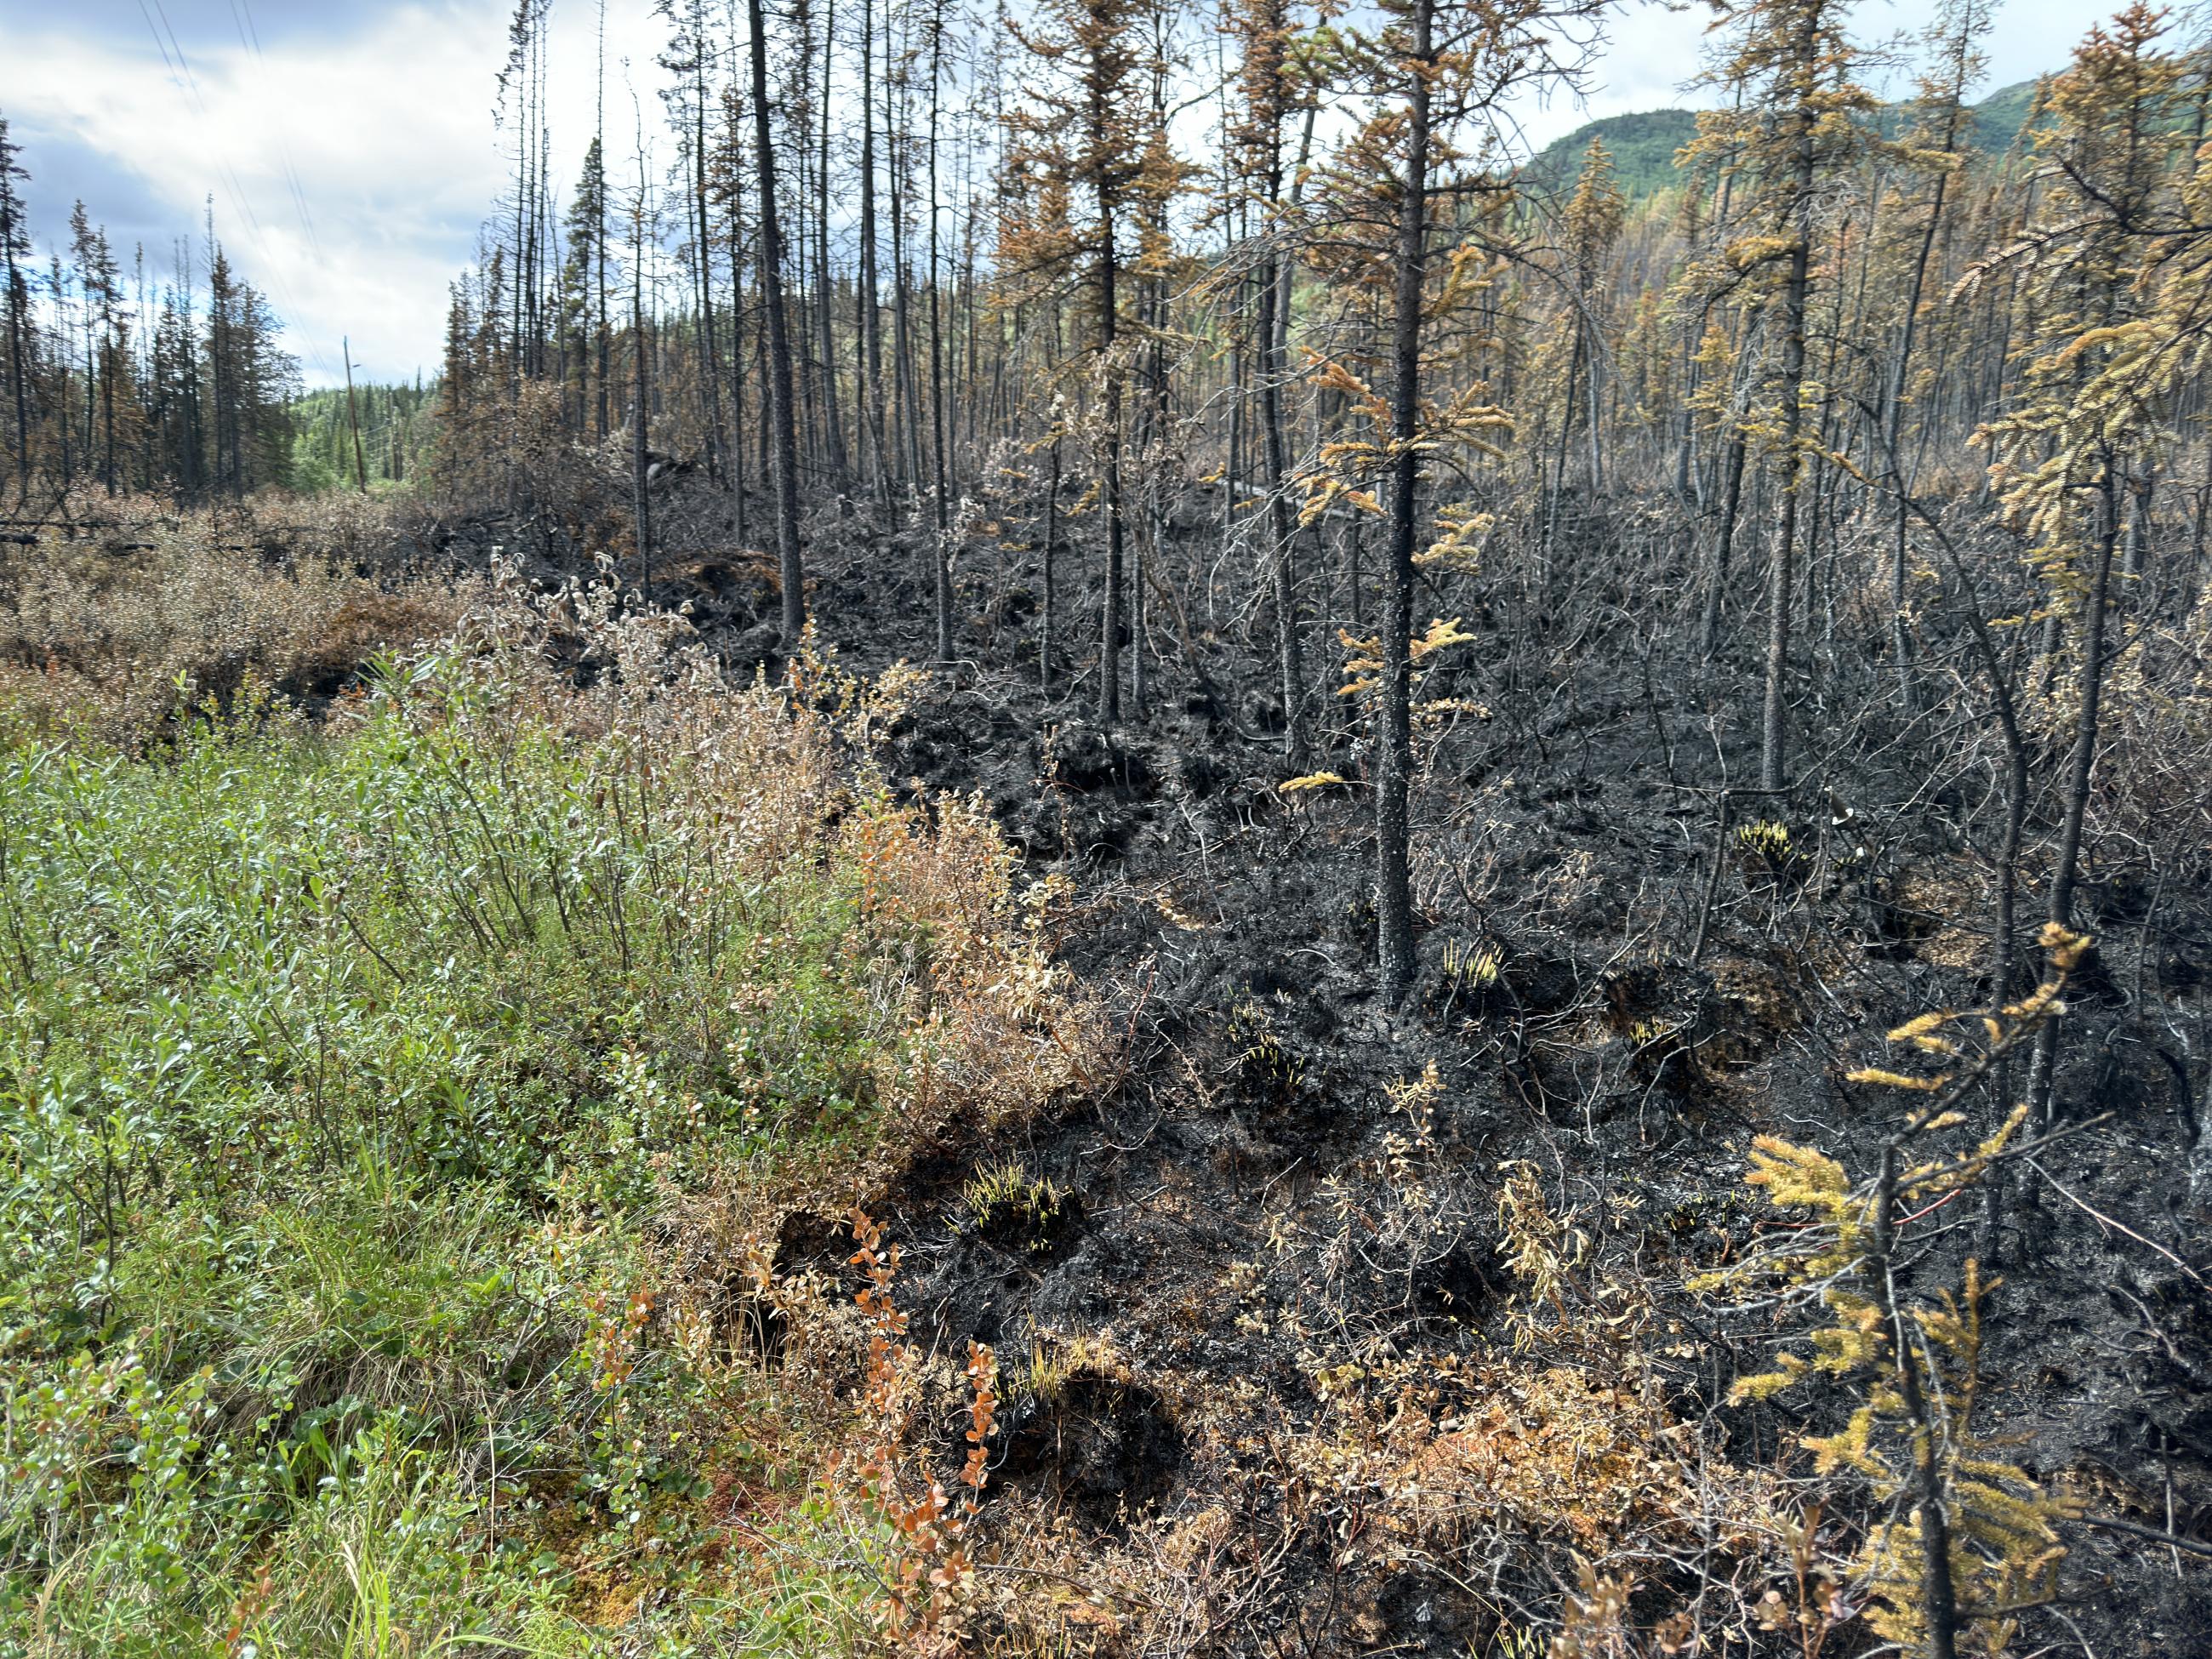 Green vegetation within a burned area.